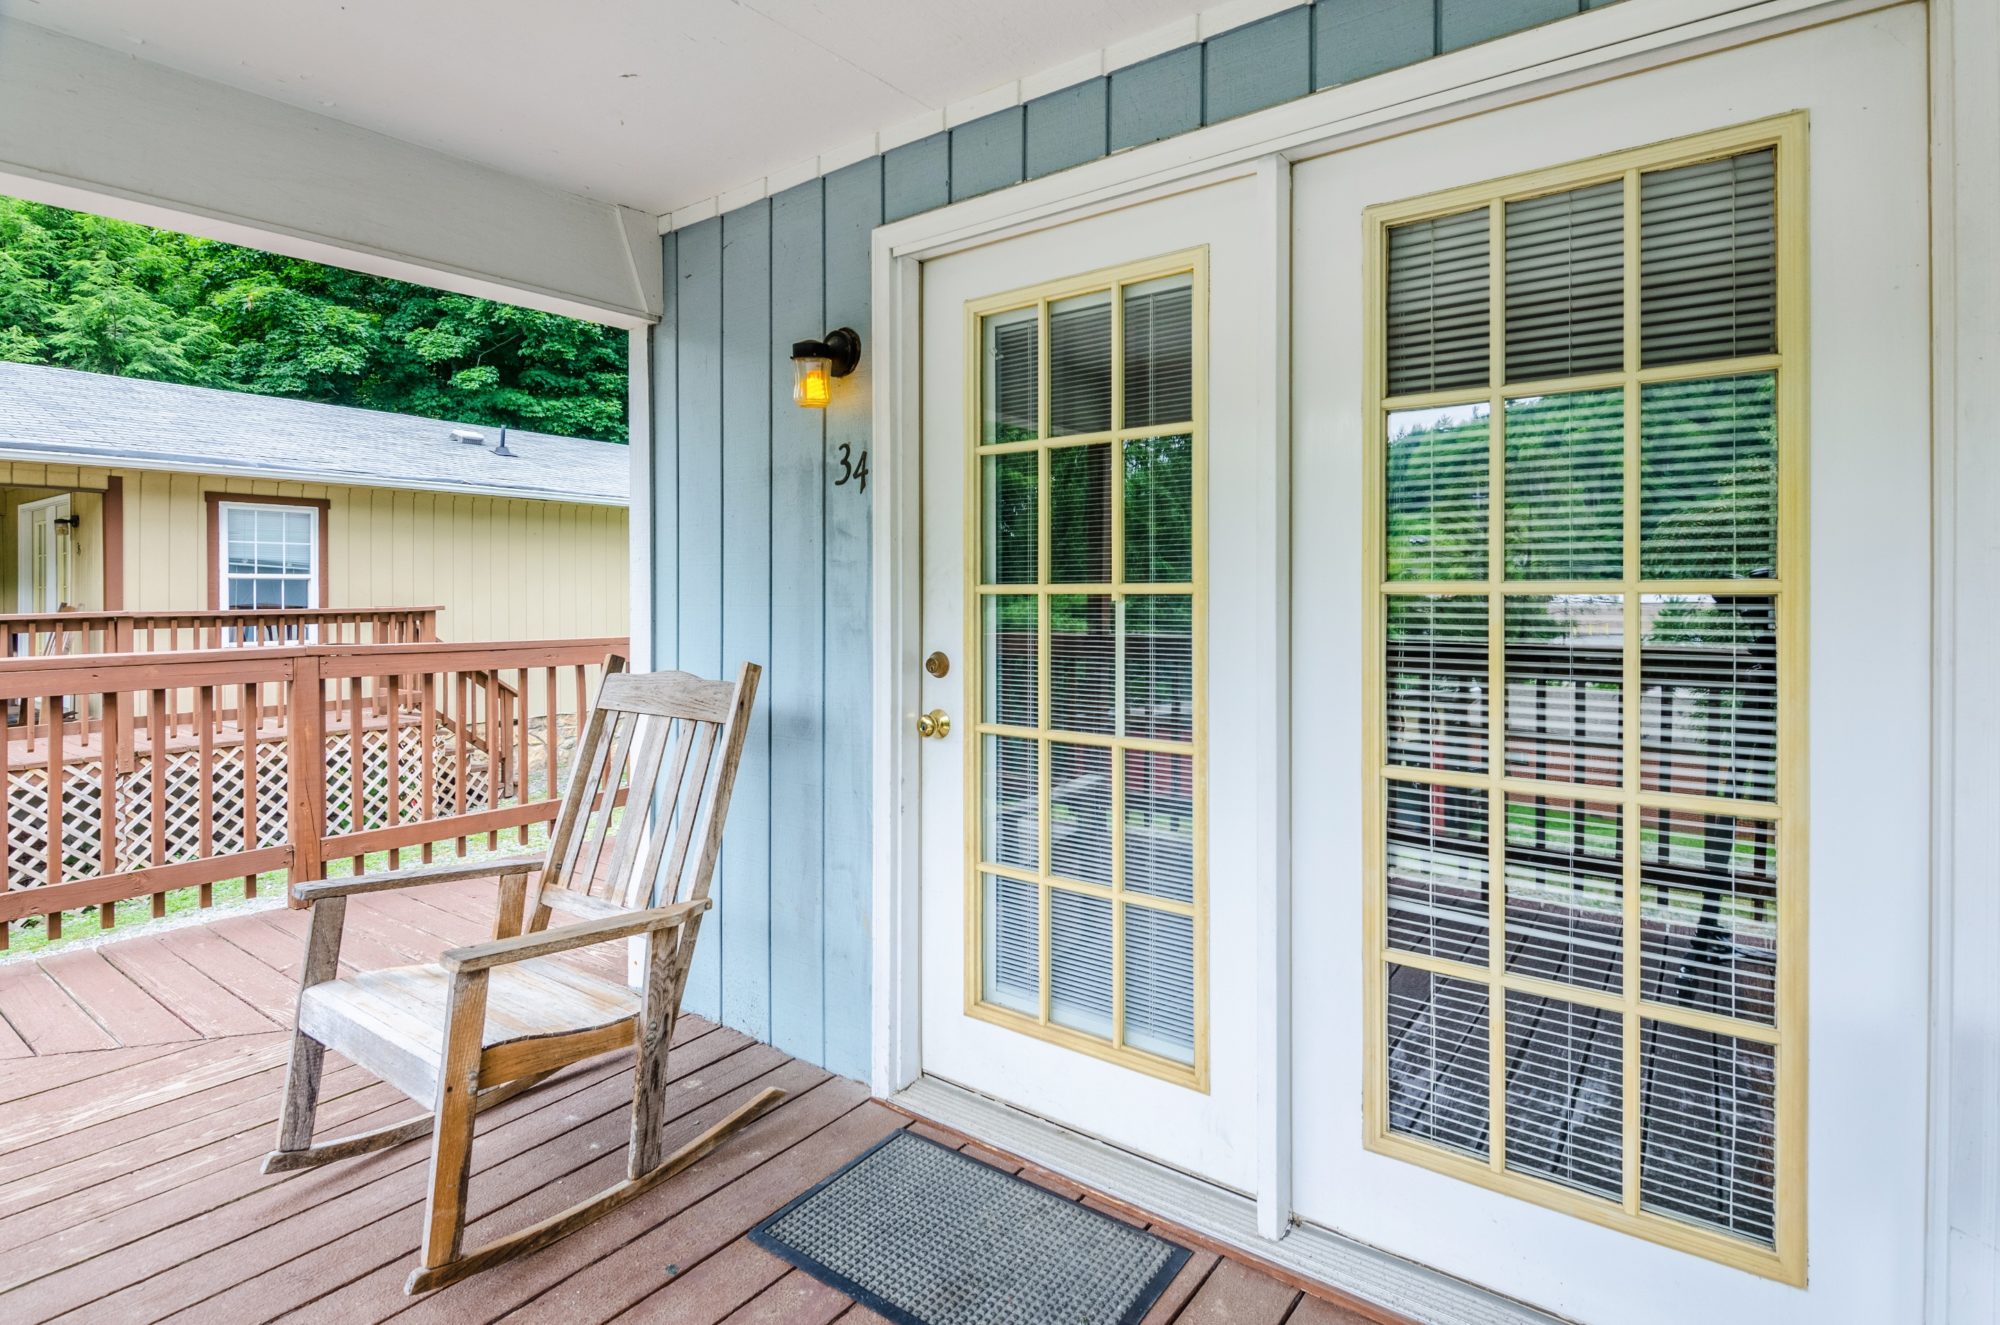 Porch, double doors, and rocking chair